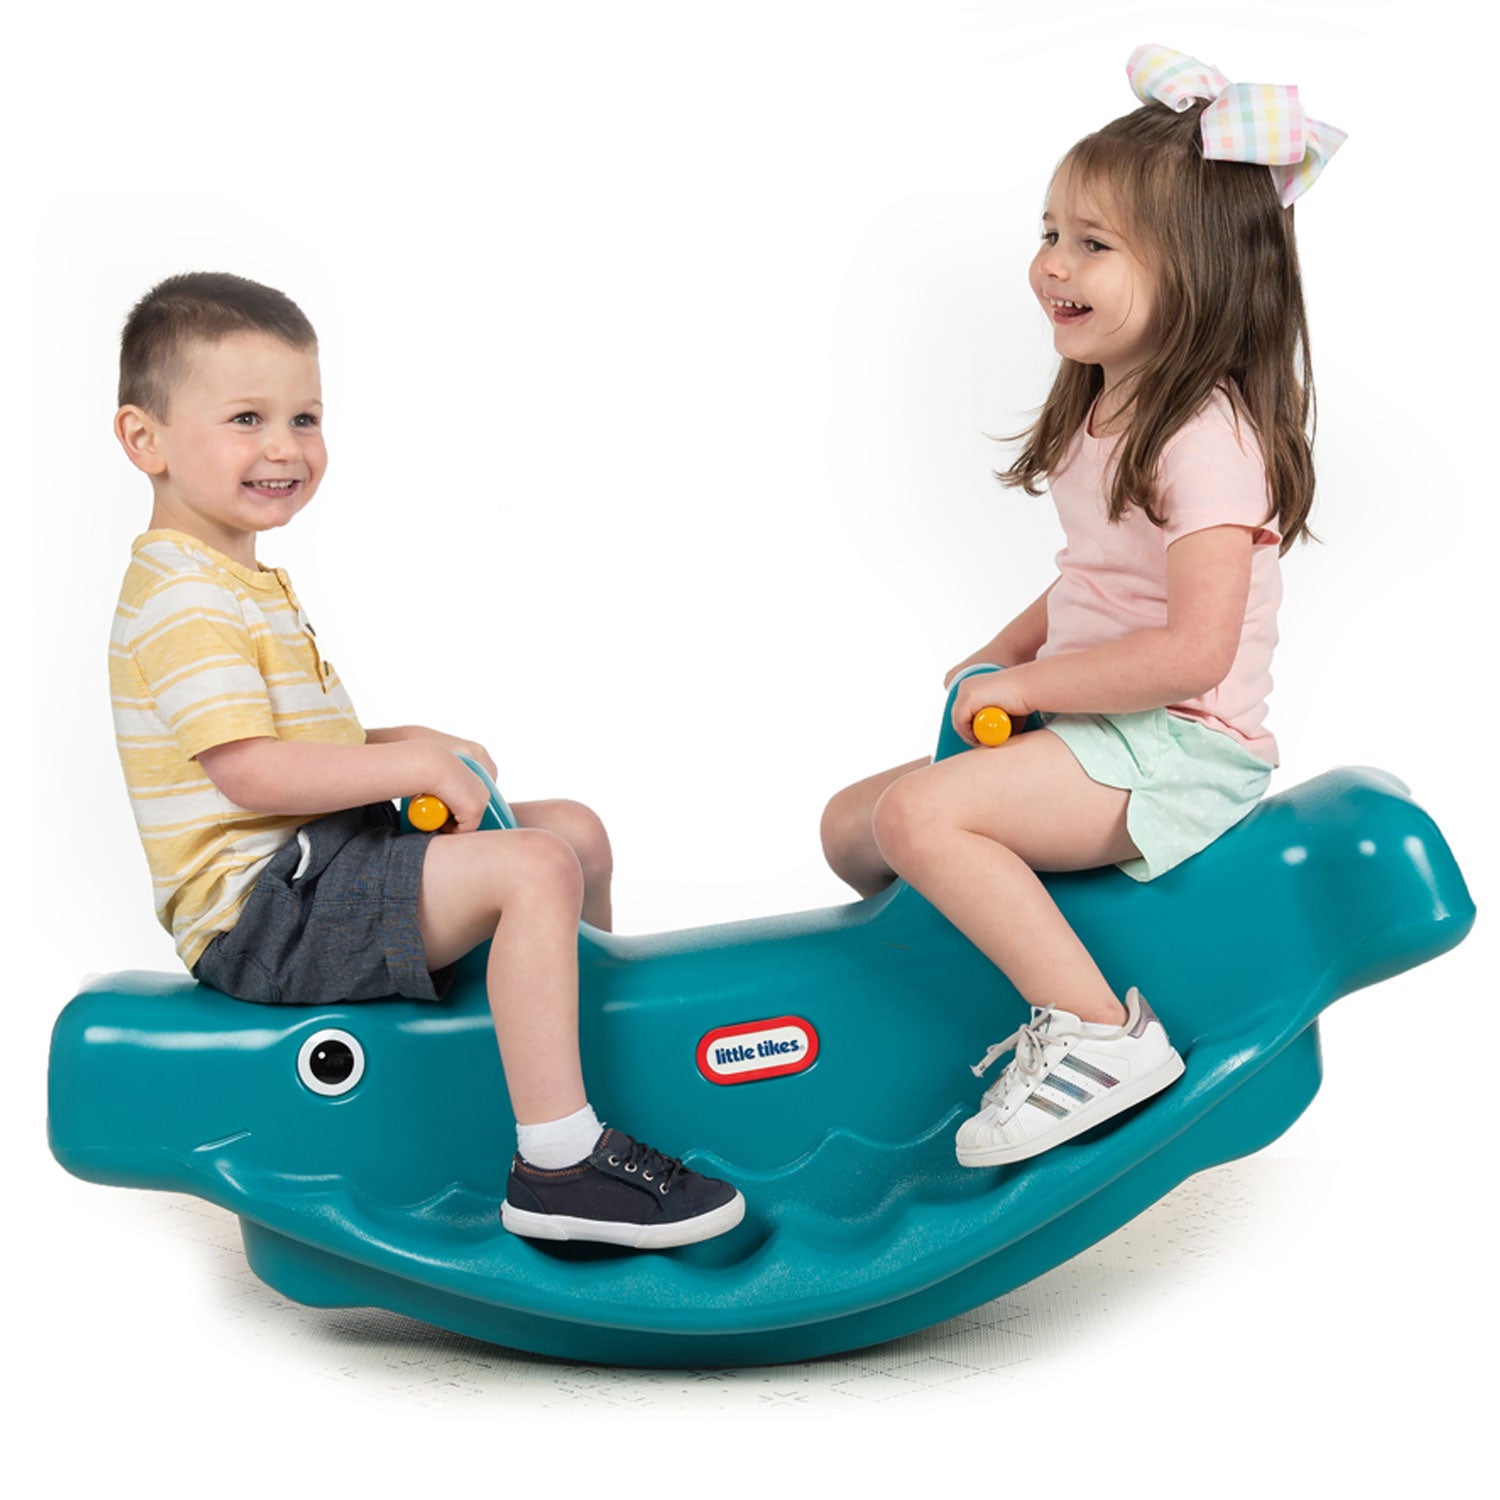 Little Tikes Seesaw Whale Teeter Totter